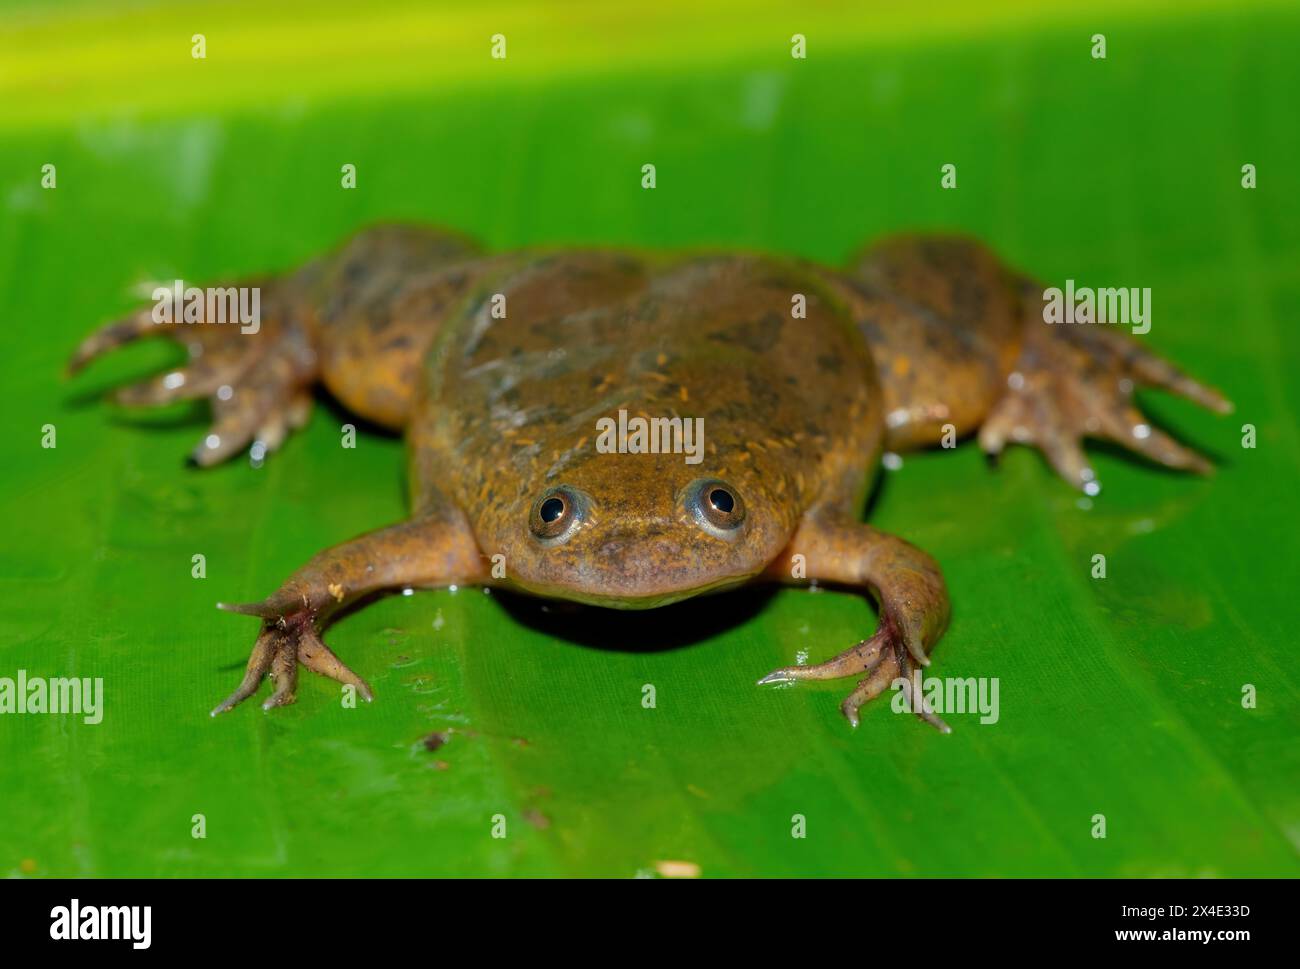 A cute Common Platanna, also known as the African Clawed Frog (Xenopus laevis) on a large green leaf Stock Photo